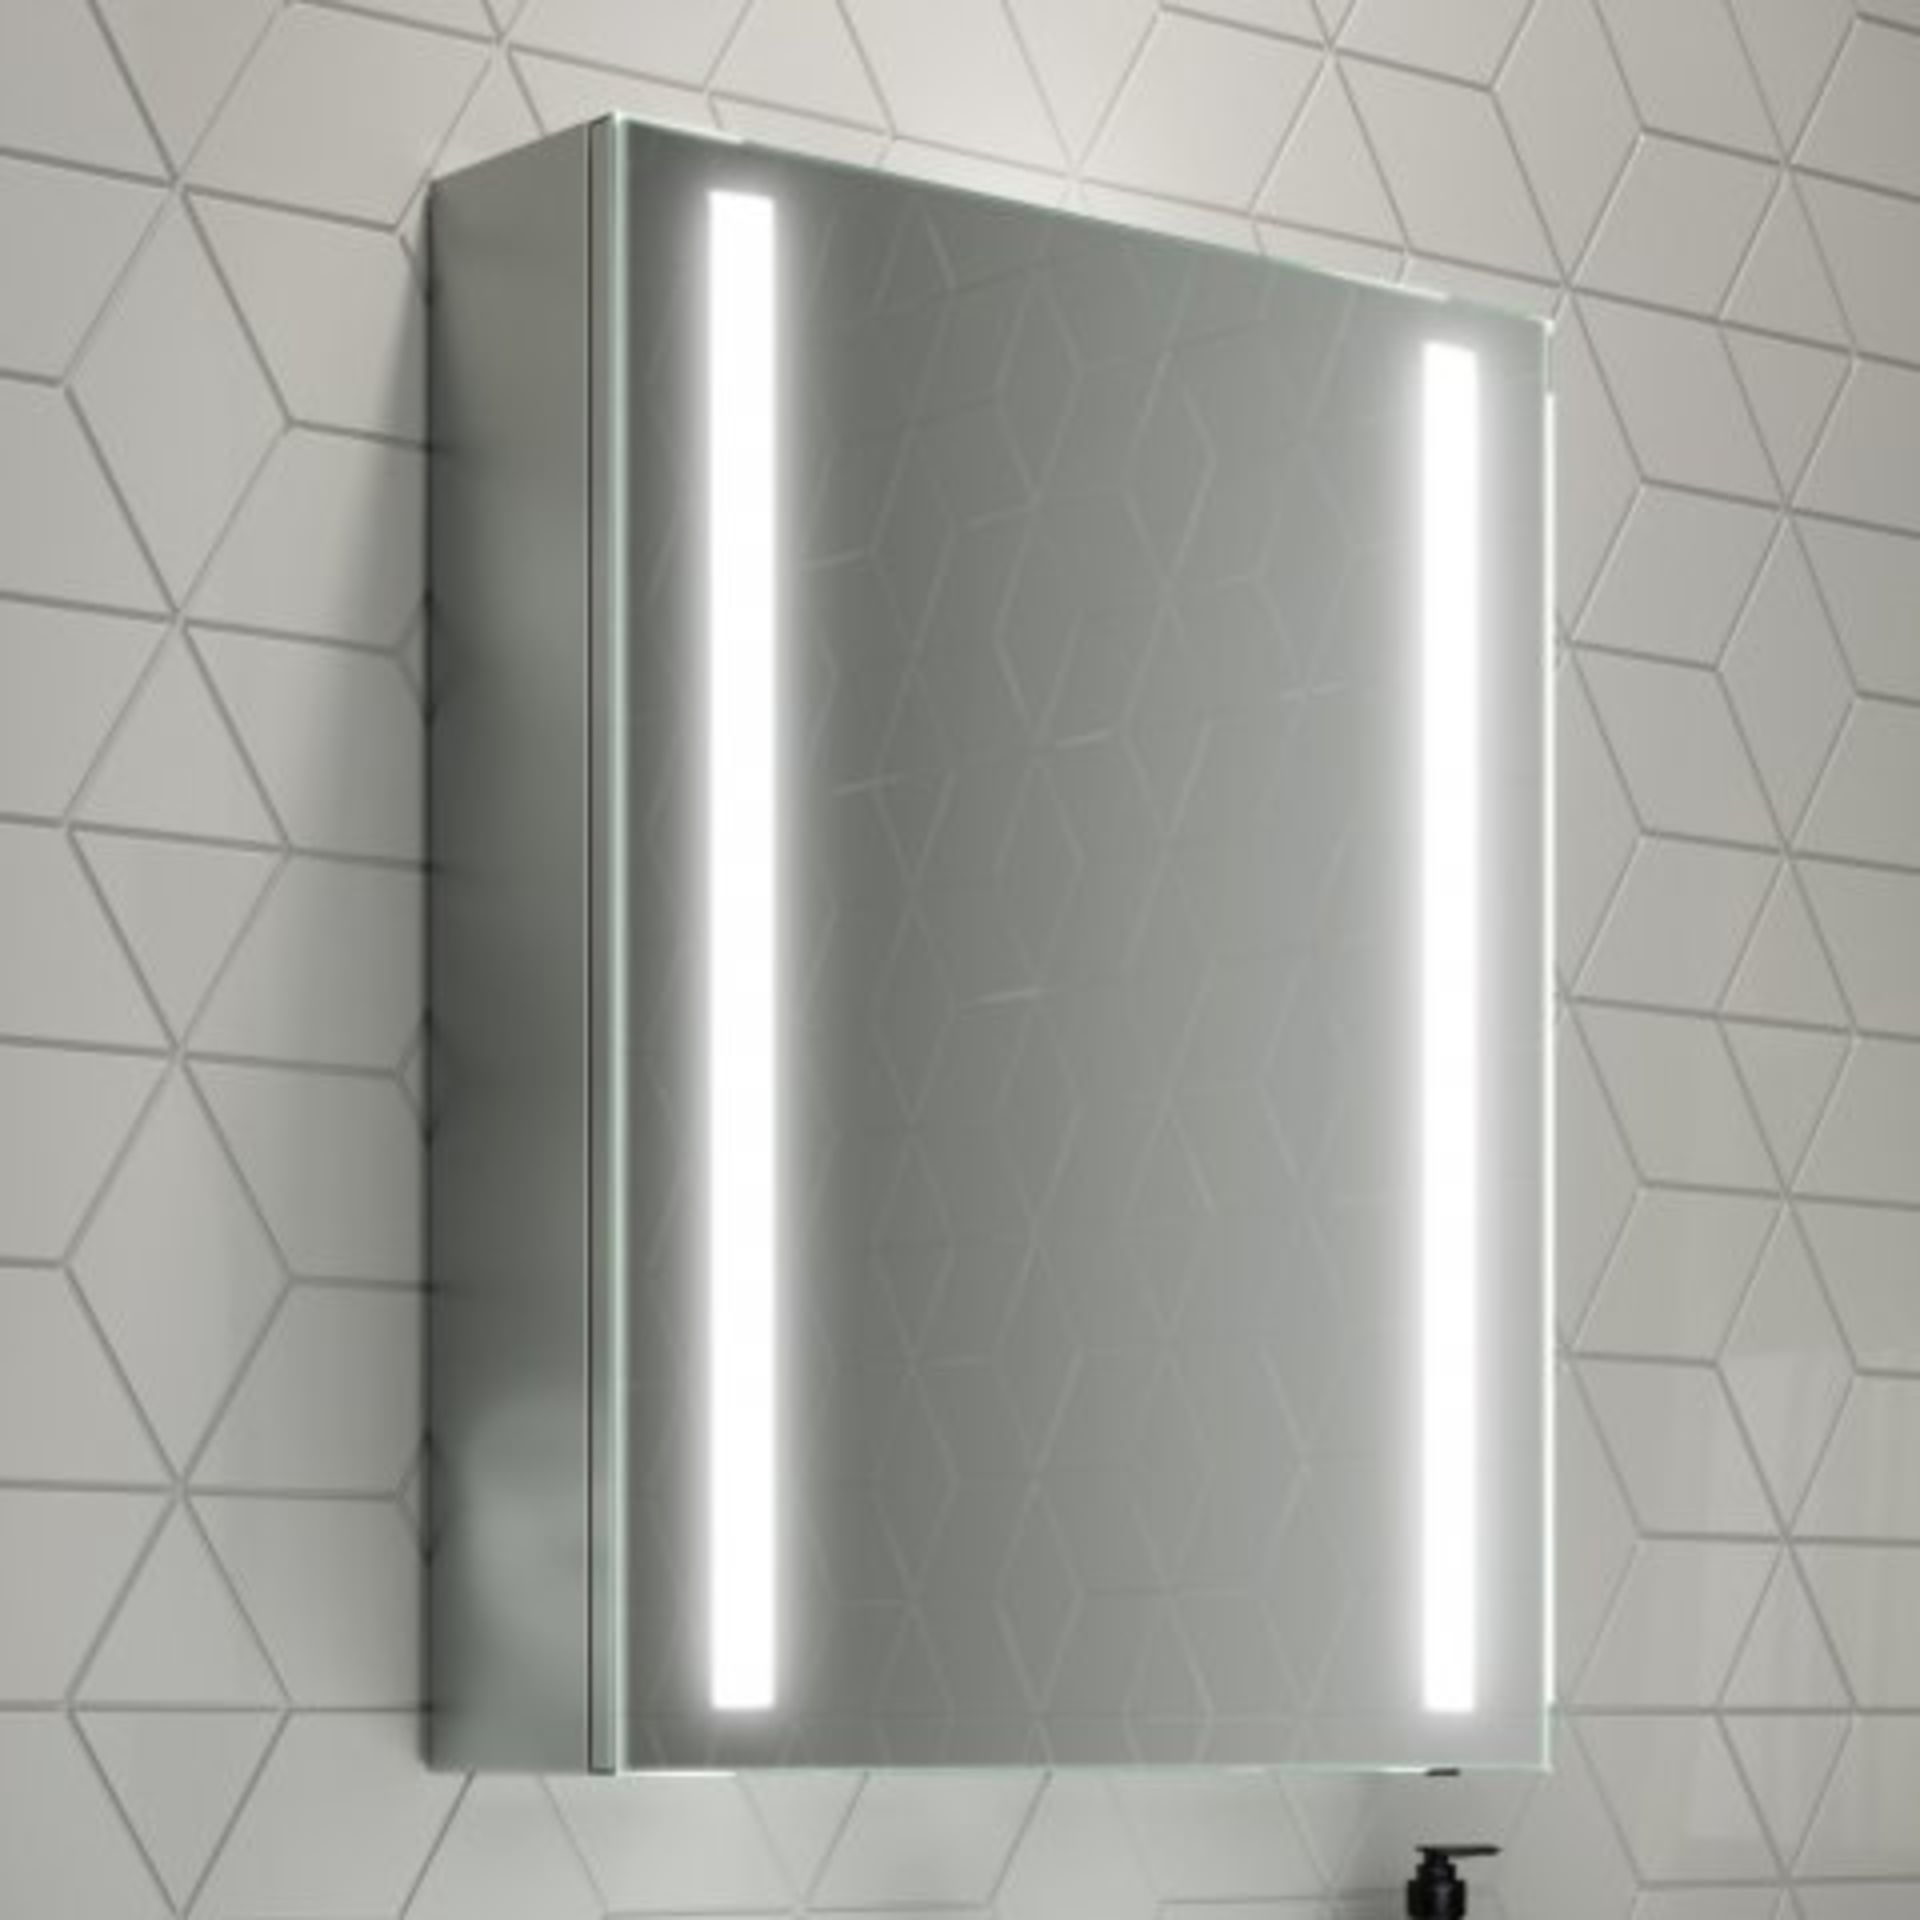 (H6) 500x650mm Dawn Illuminated LED Mirror Cabinet. RRP £599.99. Perfect Reflection The featured